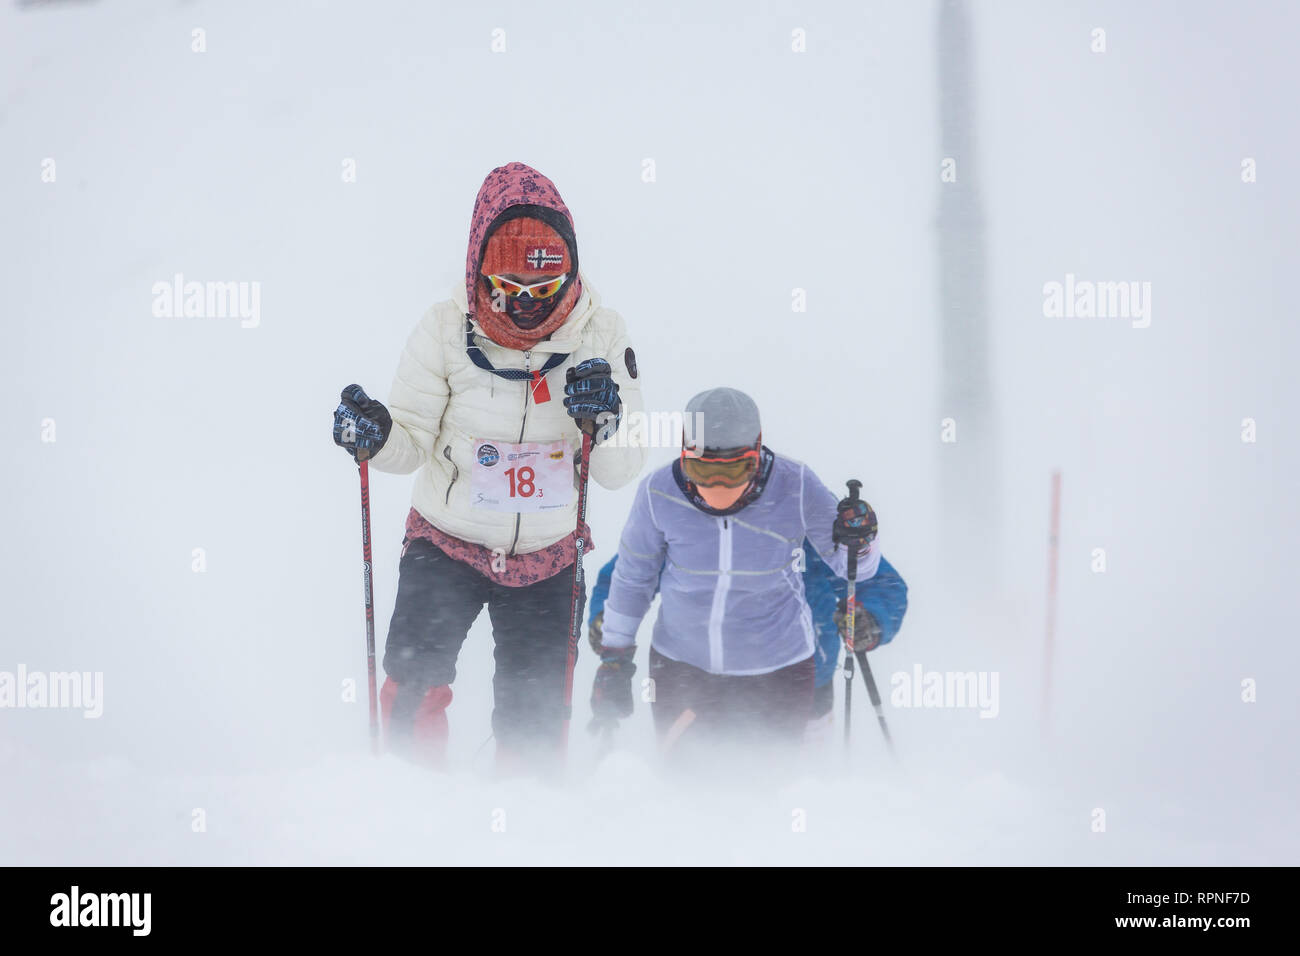 ALMATY KAZAKHSTAN - FEBRUARY 03 2019: Unidentified people walk through a snowstorm during the AlpineRais competition in the mountains during the Stock Photo